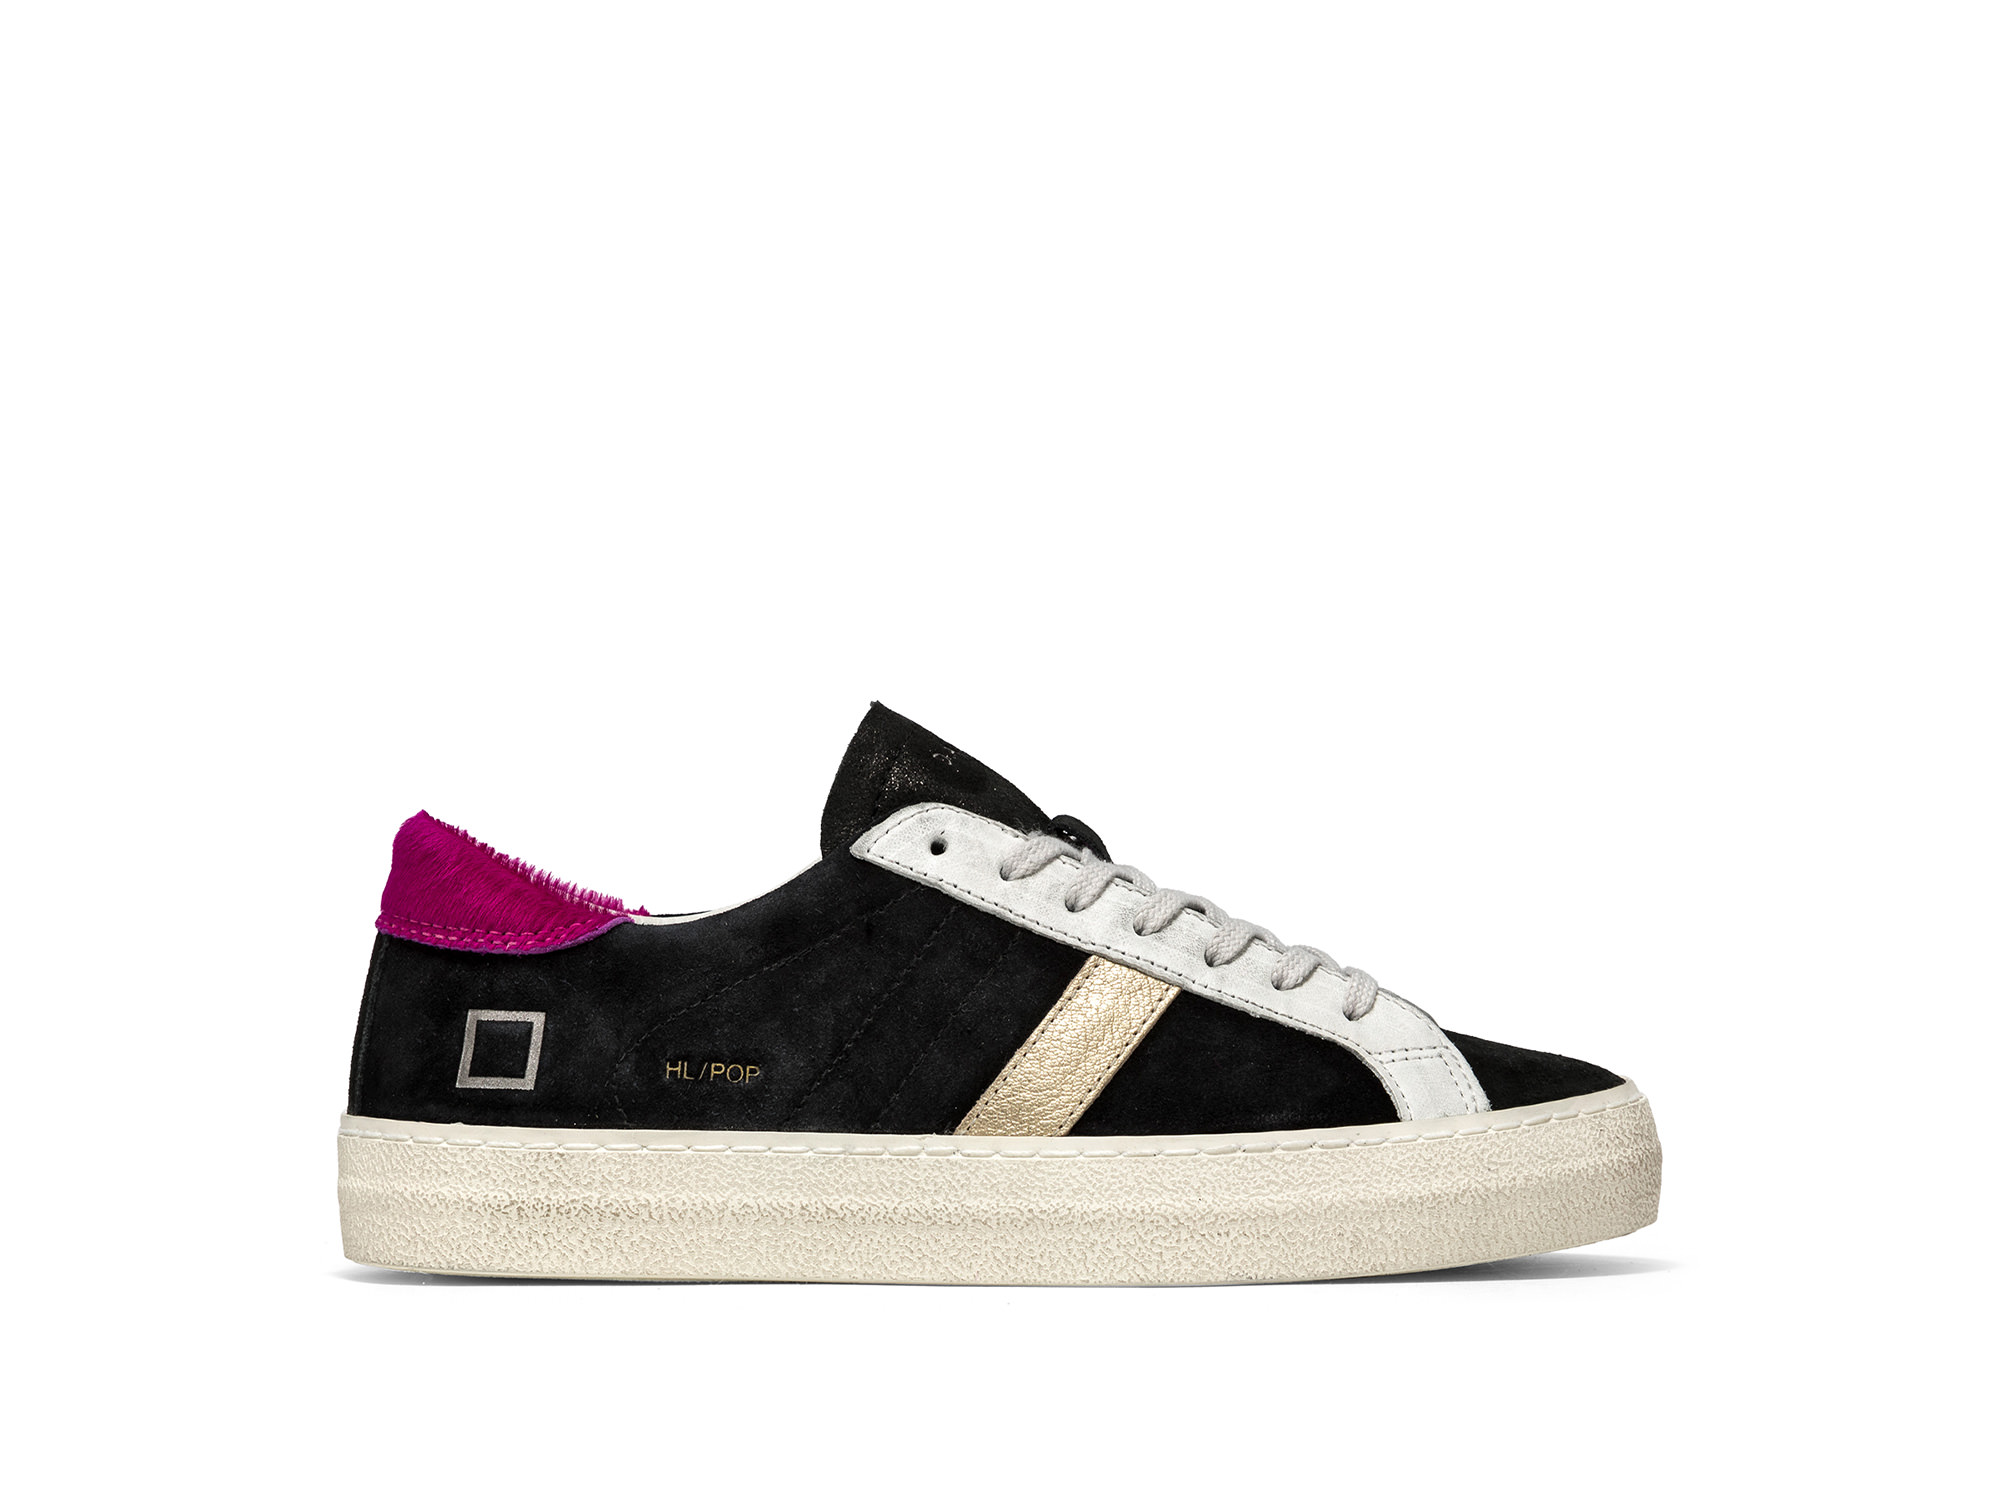 Collection Woman – D.A.T.E. SNEAKERS || T-SQUARE